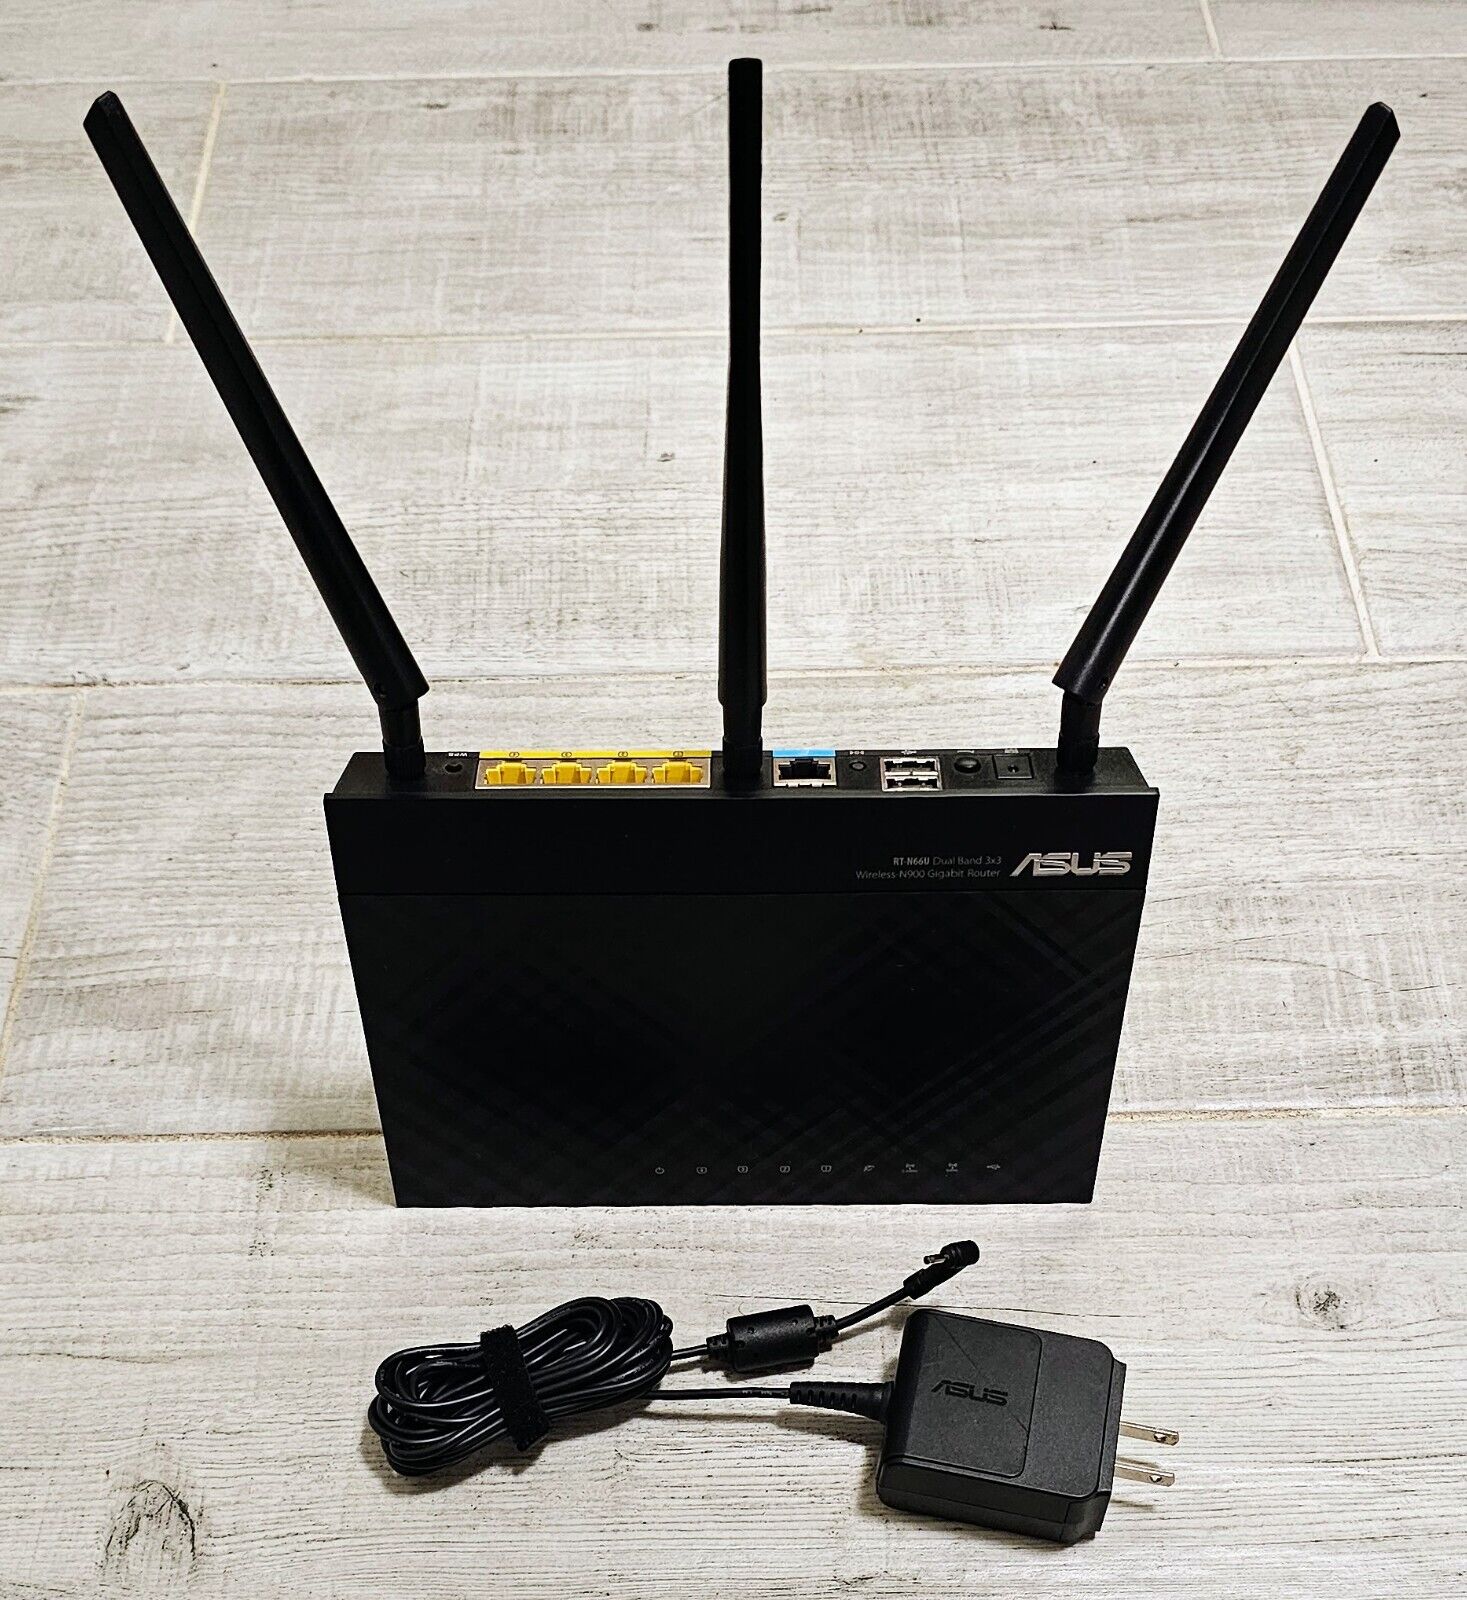 Asus RT-N66U N900 Dual-Band Wireless Router